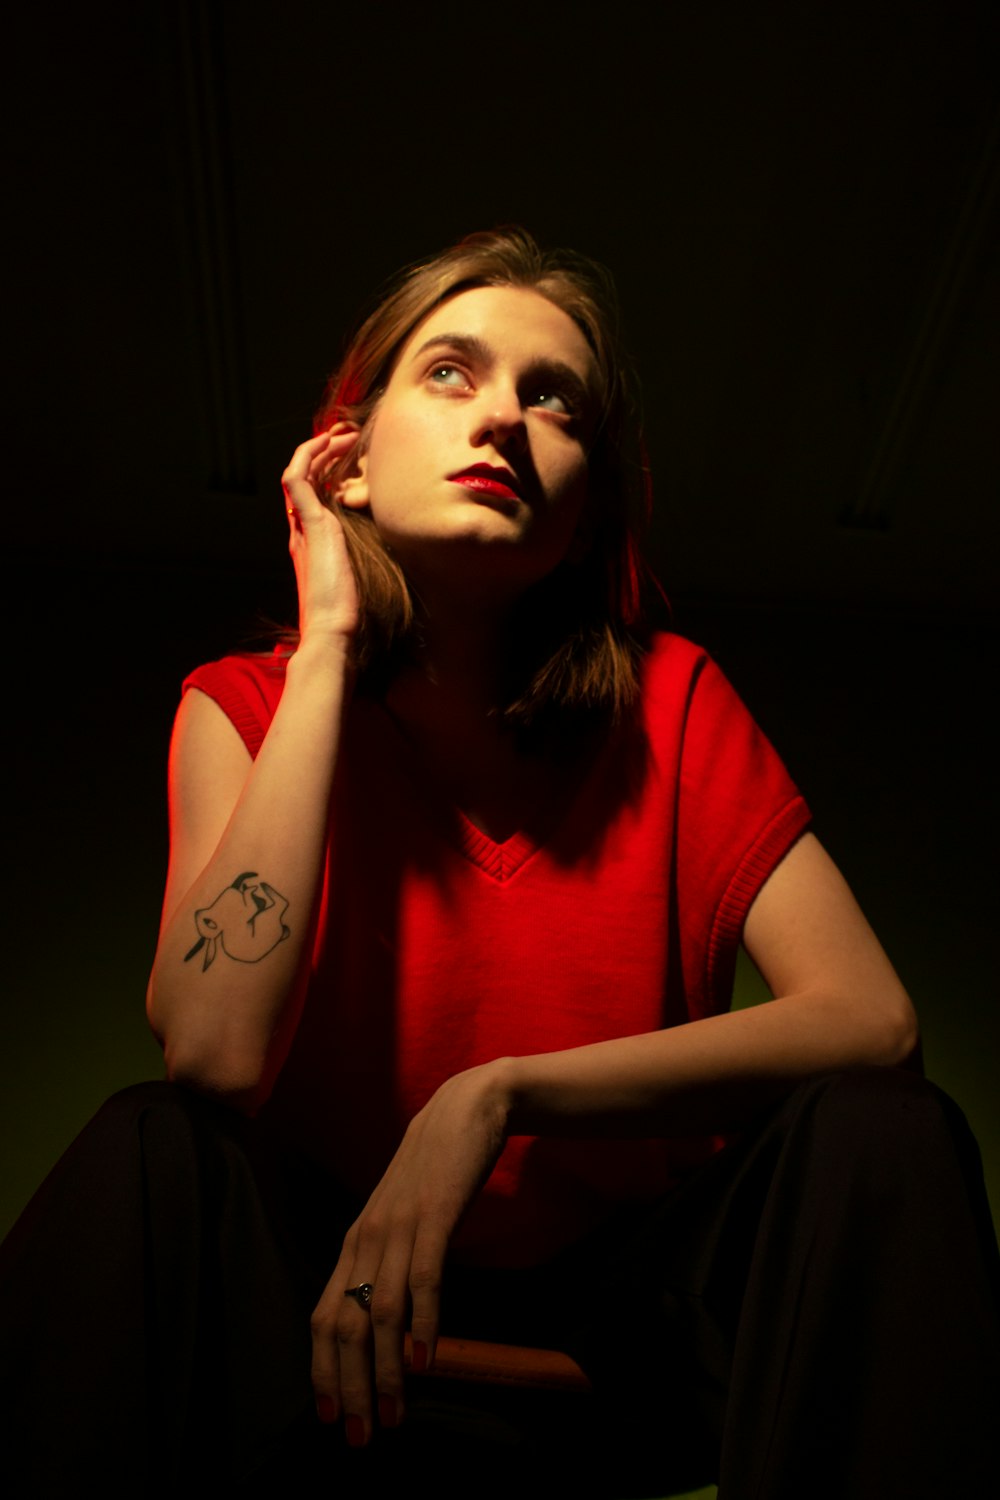 a woman in a red shirt sitting in the dark